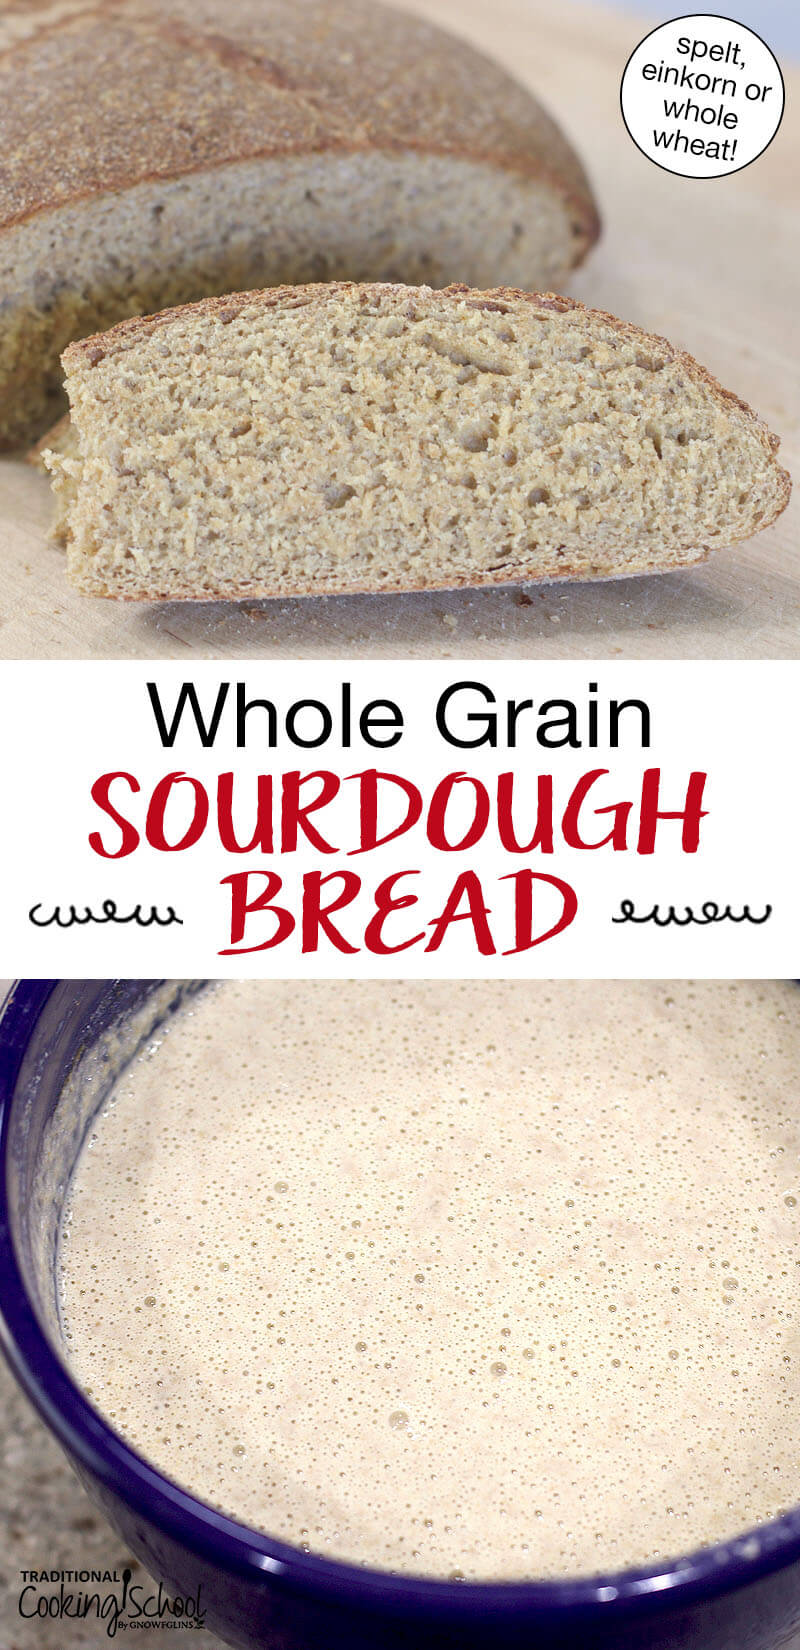 Photo collage of sourdough starter, and a slice of sourdough bread. Text overlay says: "Whole Grain Sourdough Bread (spelt, einkorn or whole wheat!)"